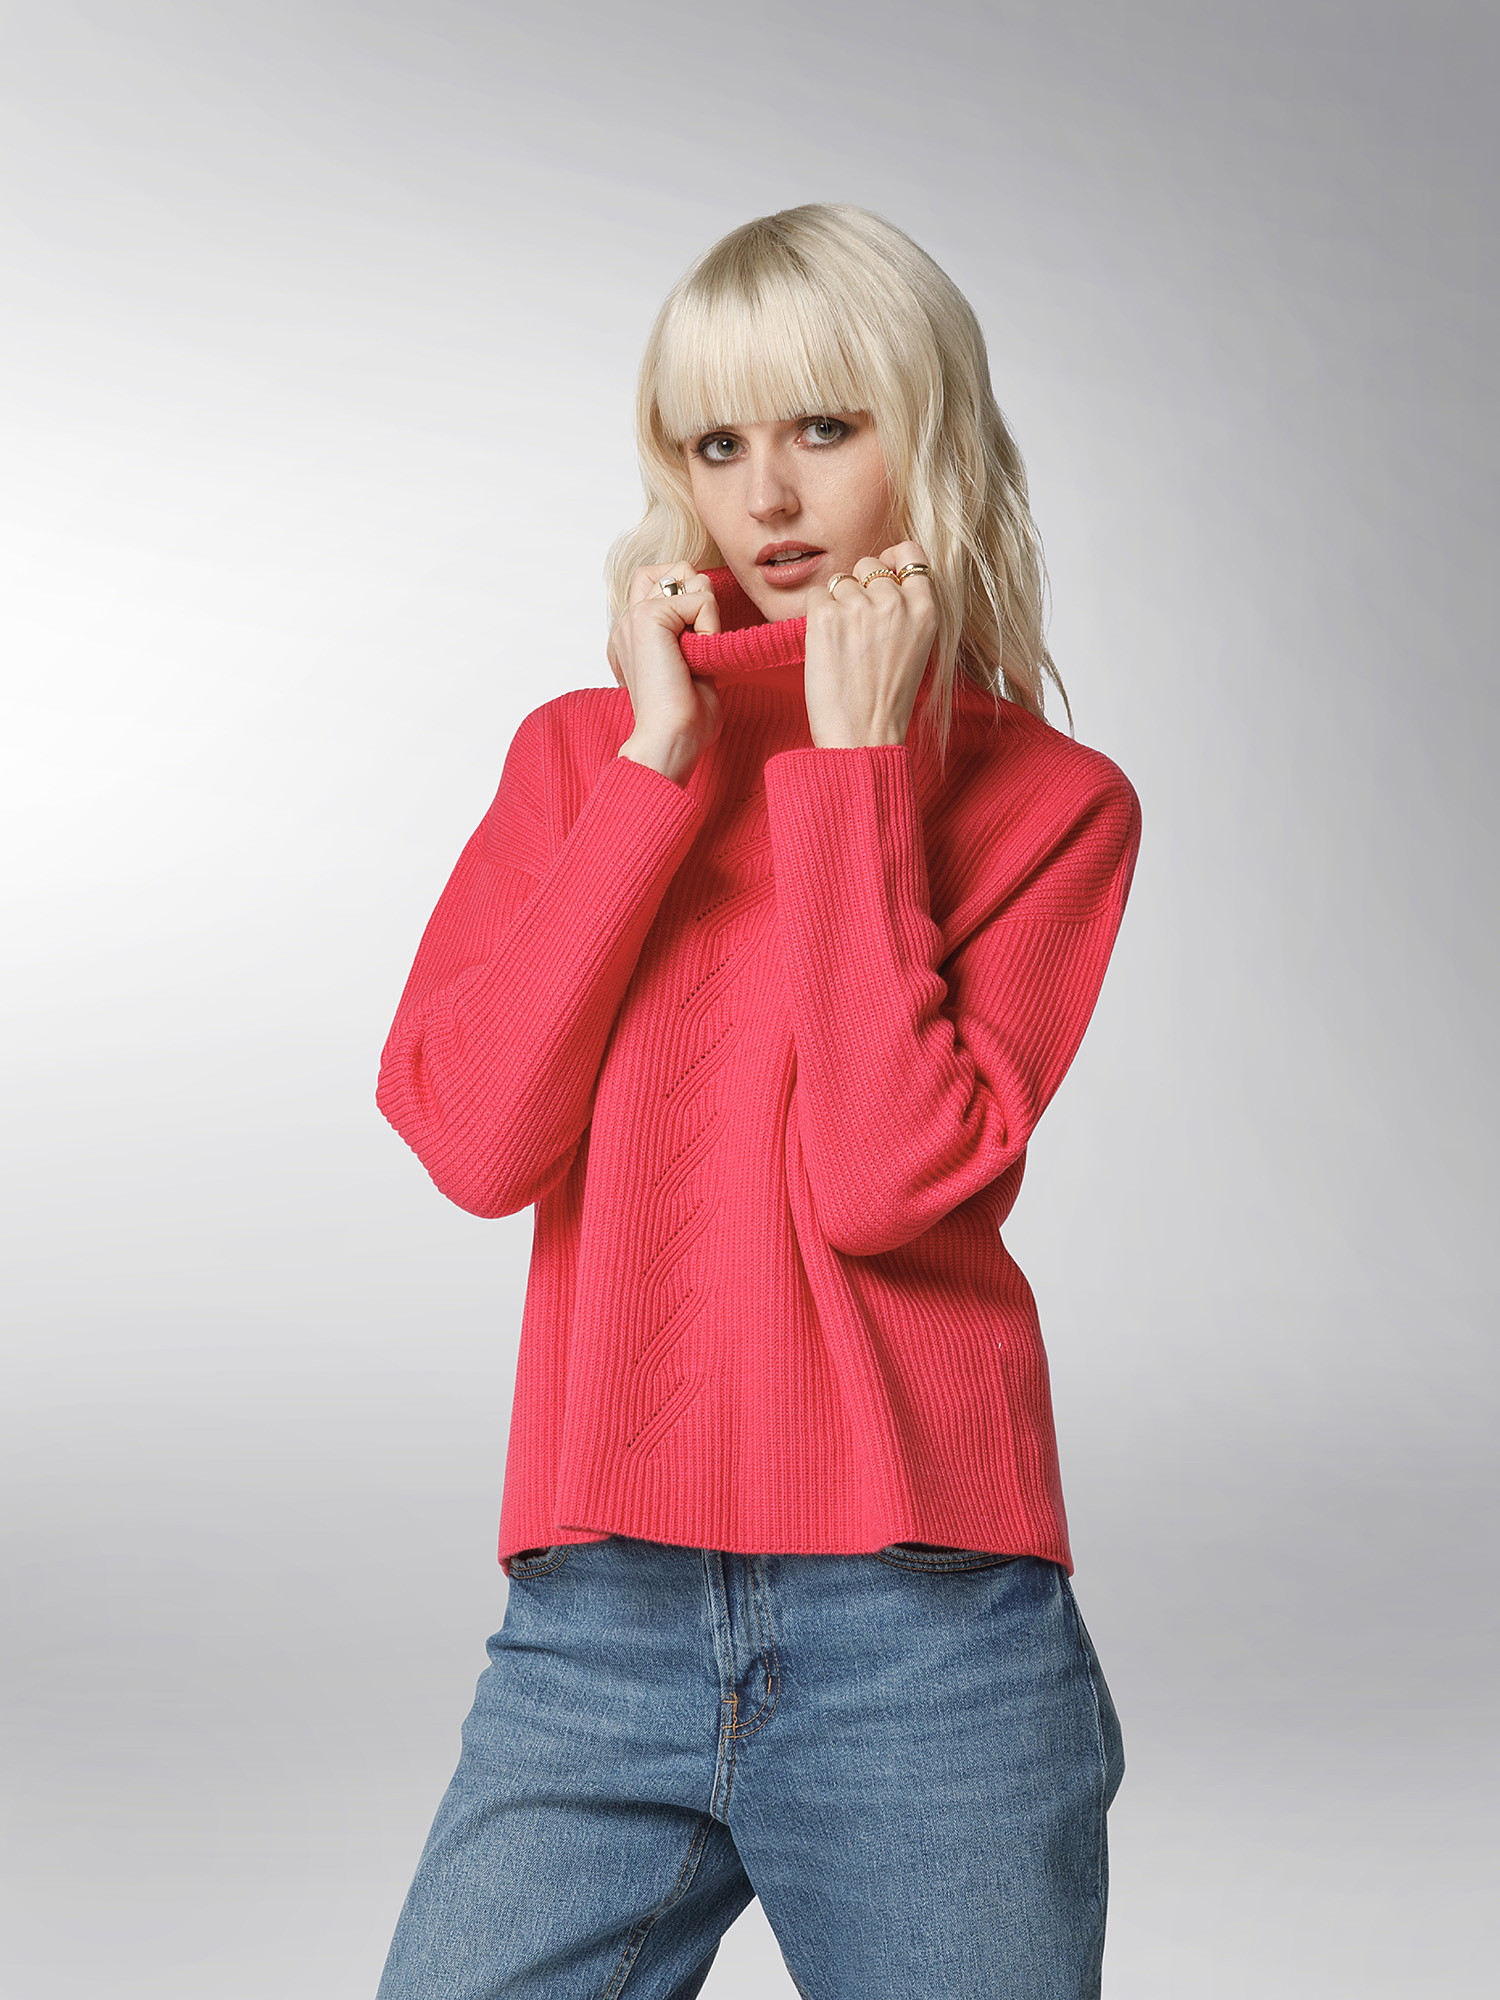 K Collection - Turtleneck pullover in extrafine wool, Pink Fuchsia, large image number 3